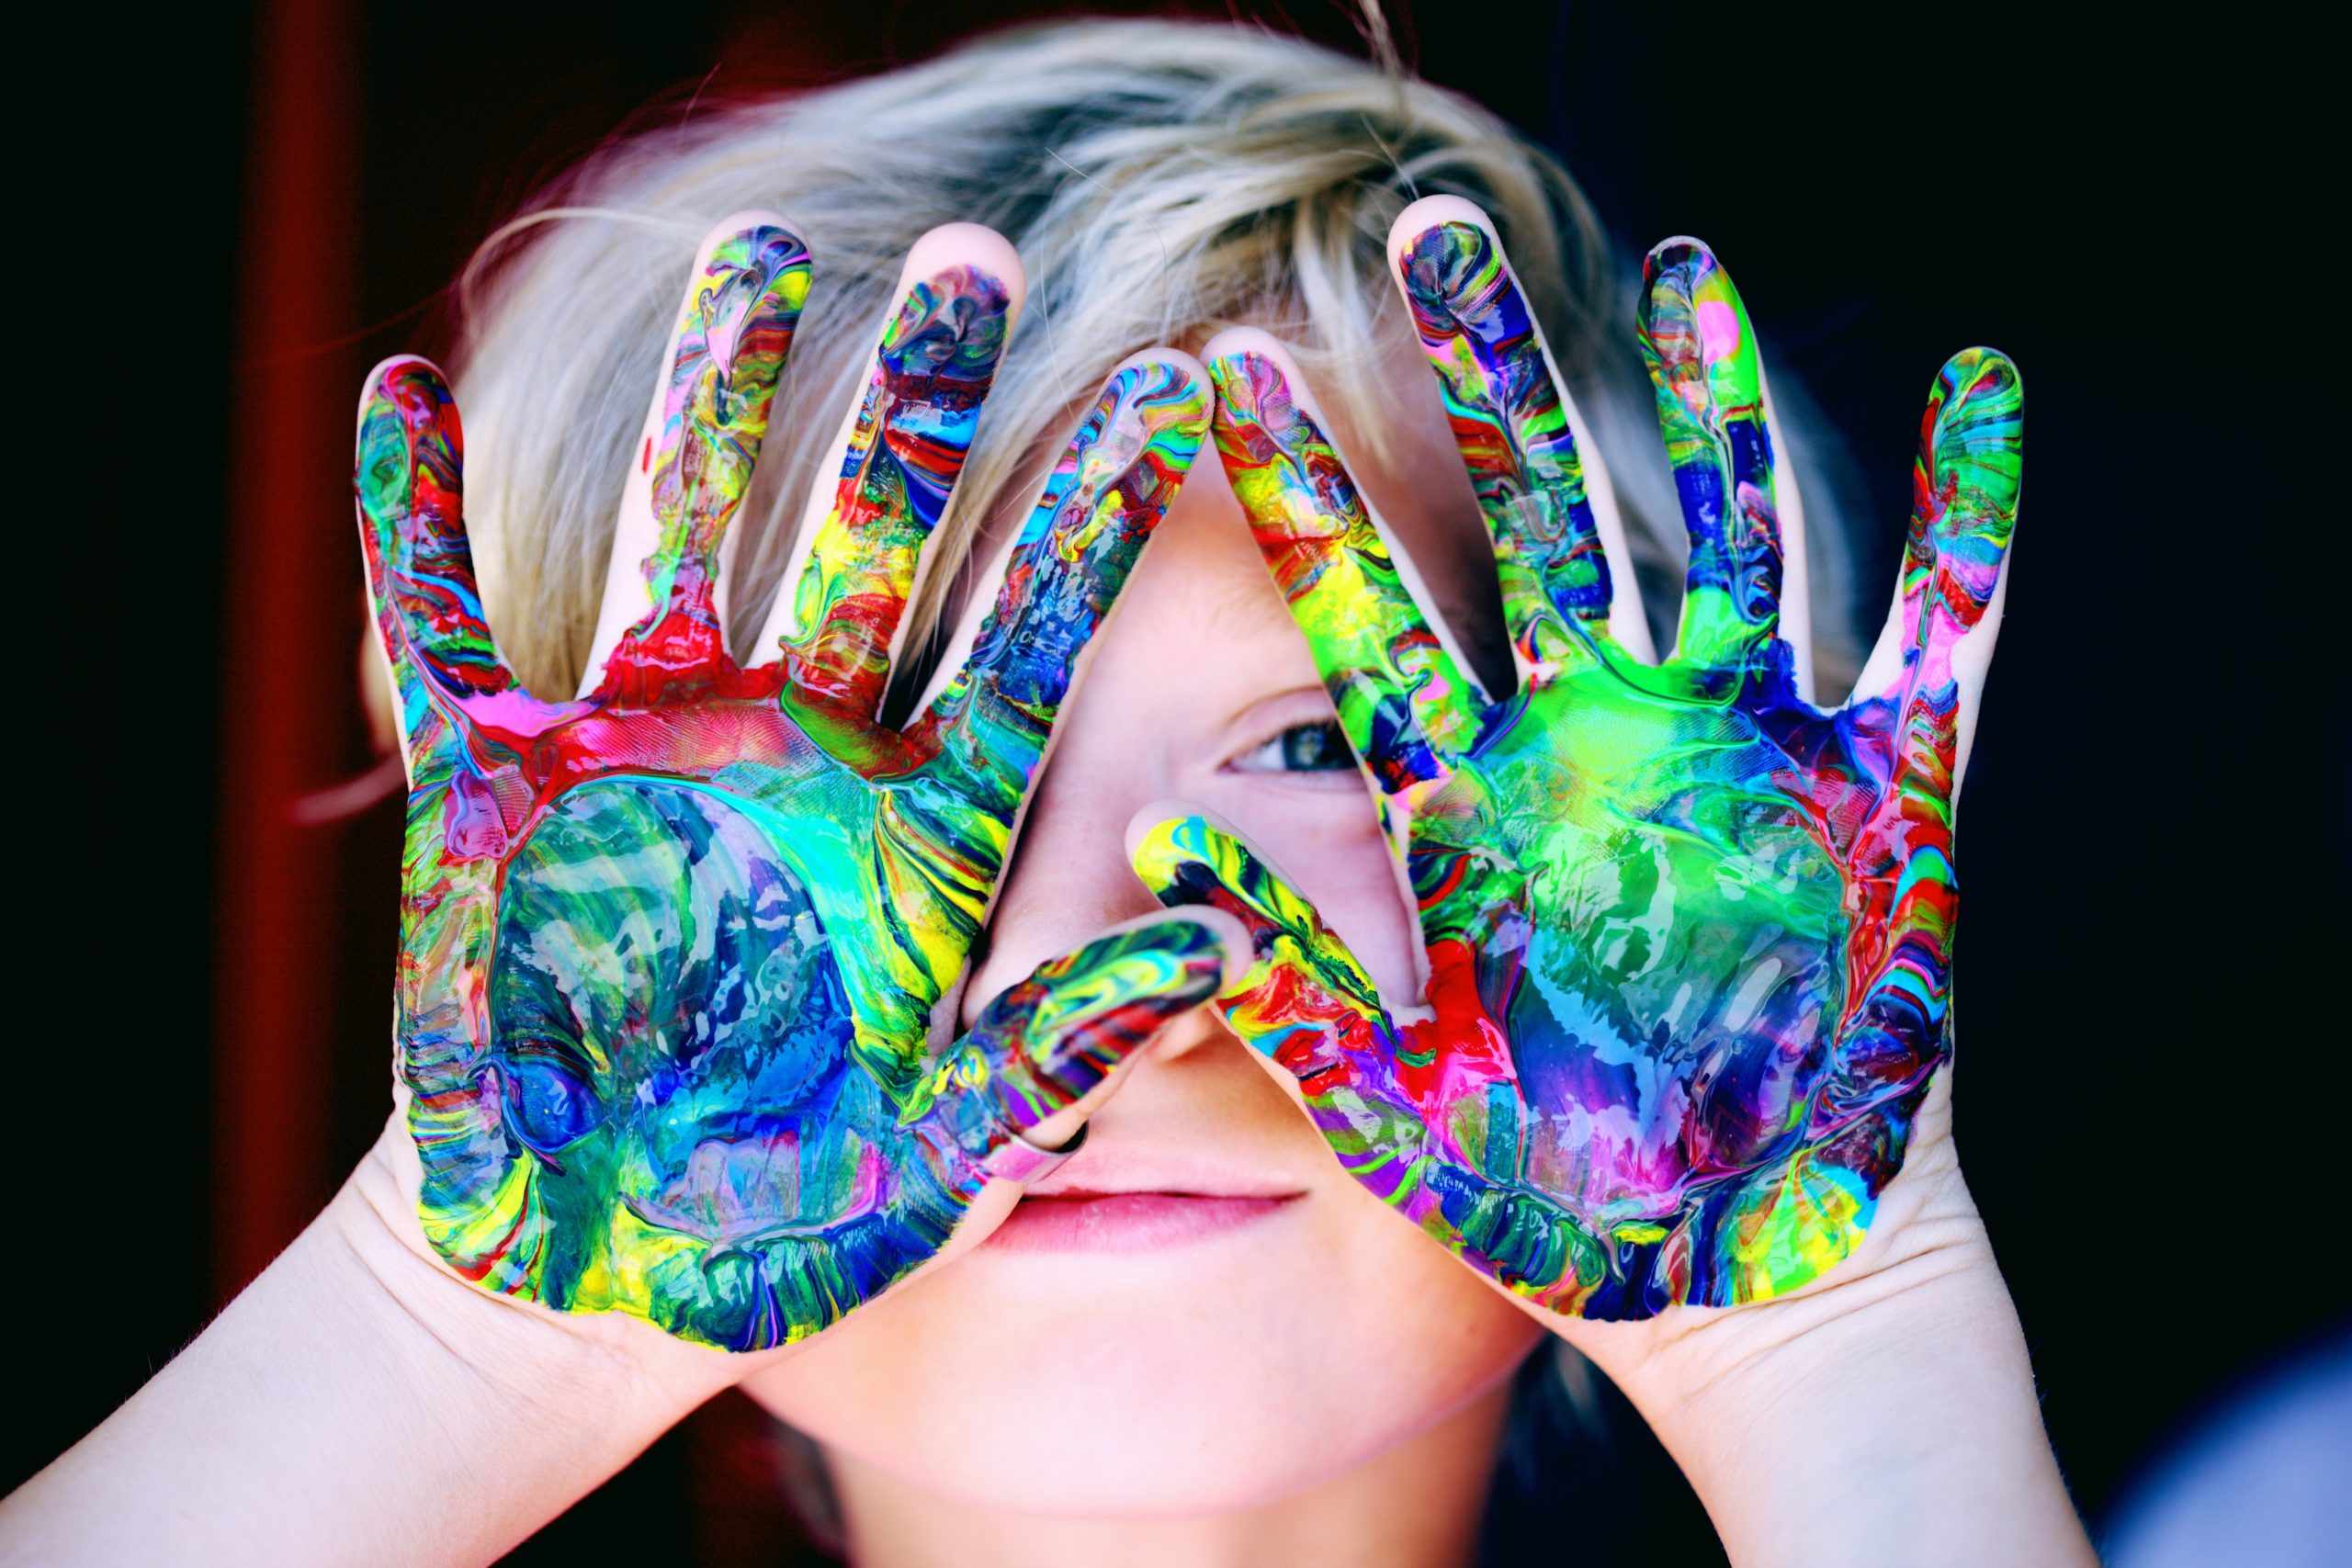 a young girl with painted hands covering her eyes.